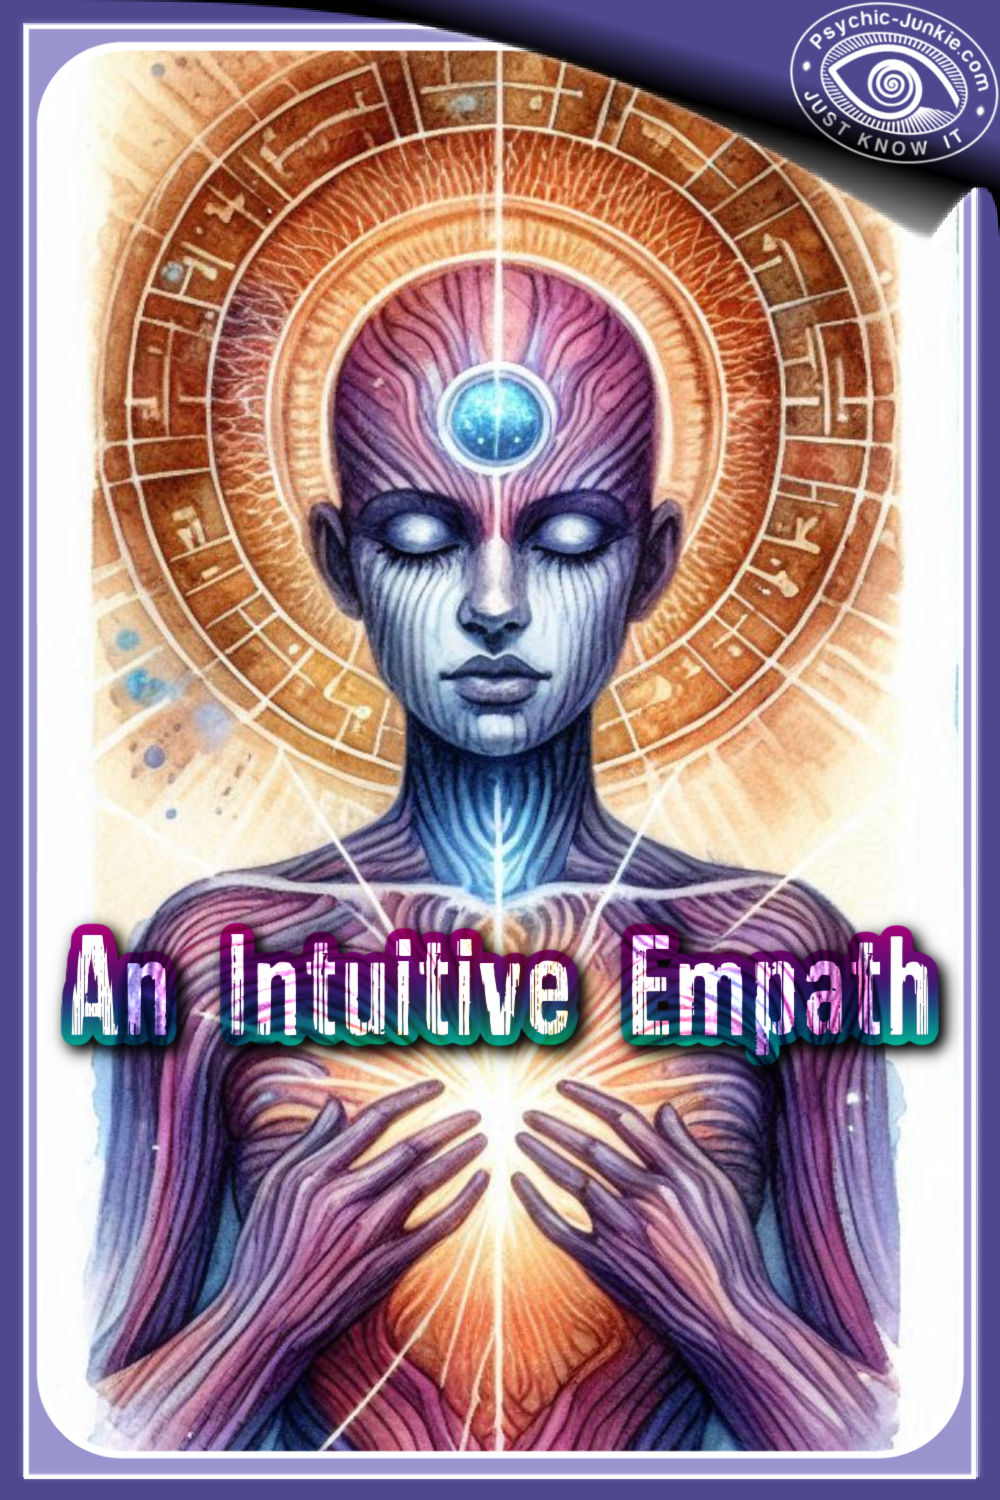 What Is An Intuitive Empath?